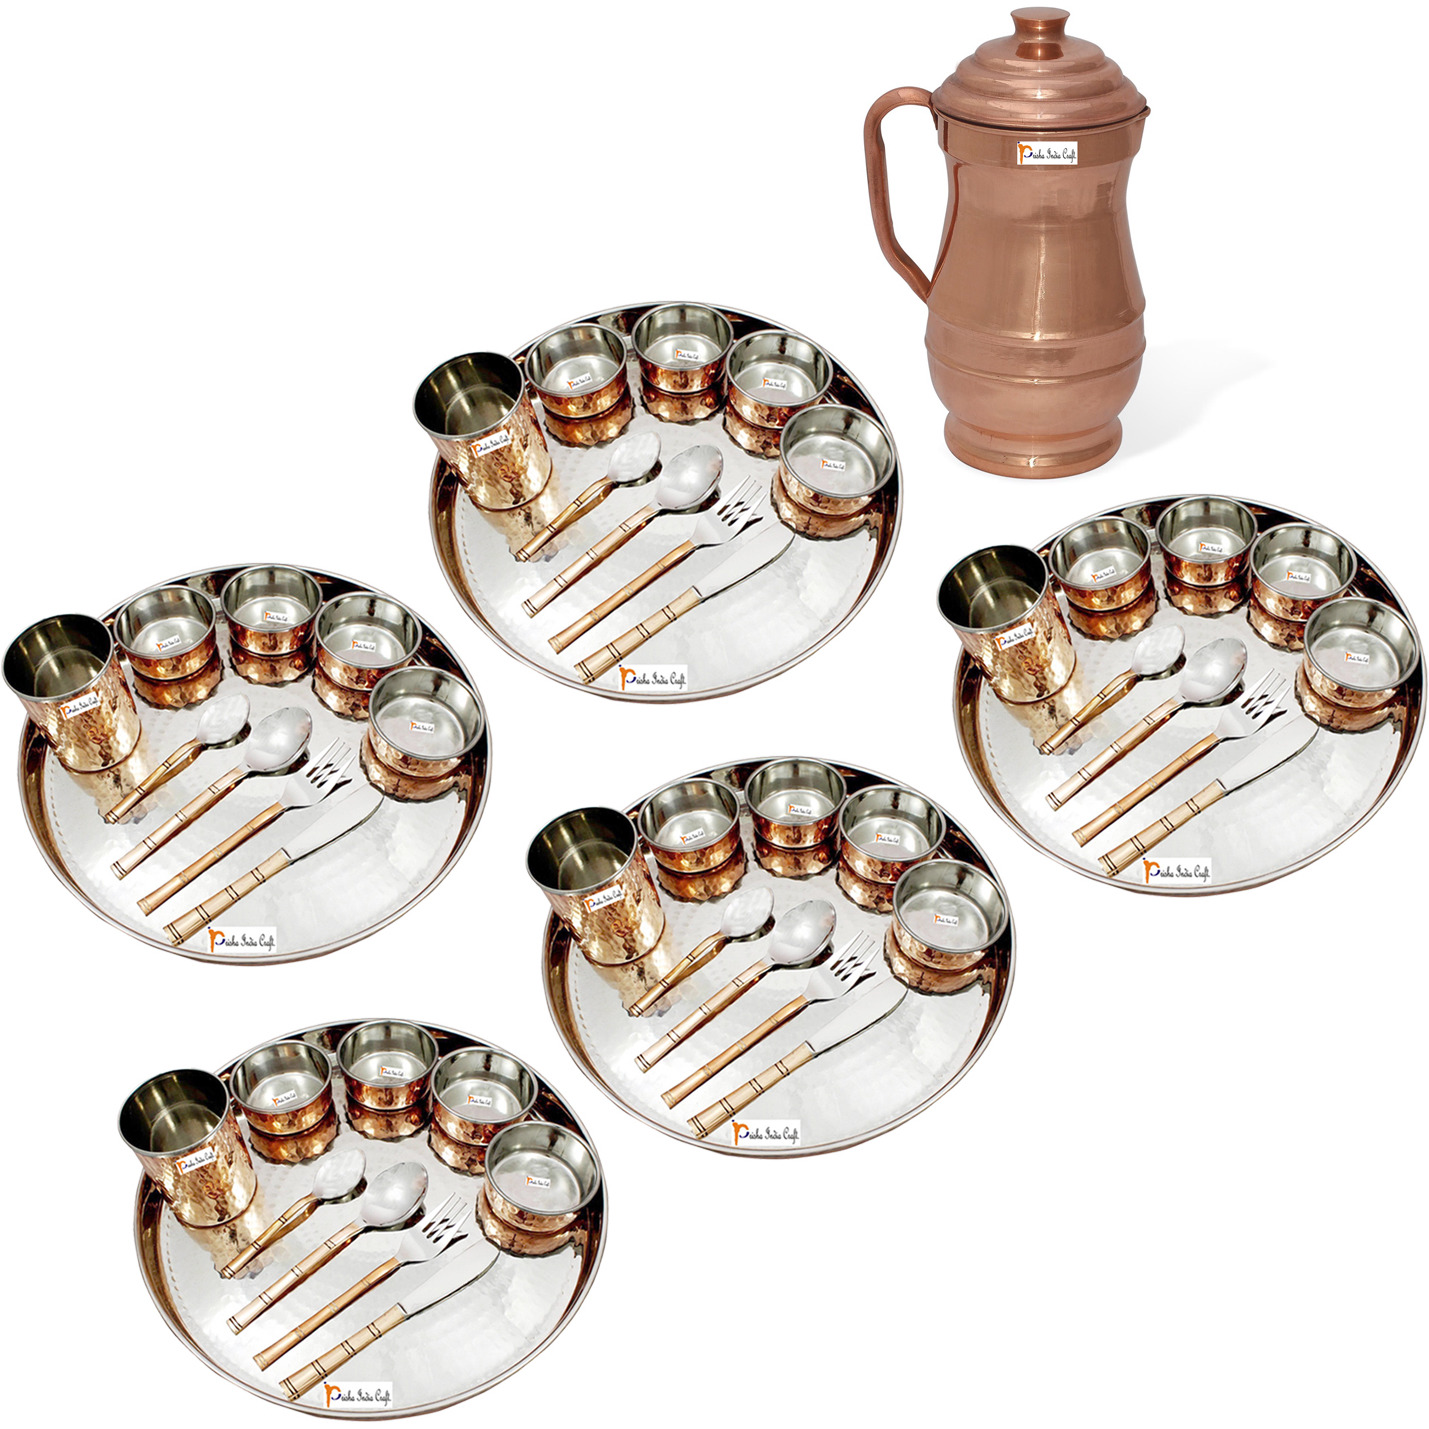 Prisha India Craft B. Set of 5 Dinnerware Traditional Stainless Steel Copper Dinner Set of Thali Plate, Bowls, Glass and Spoons, Dia 13  With 1 Pure Copper Maharaja Pitcher Jug - Christmas Gift